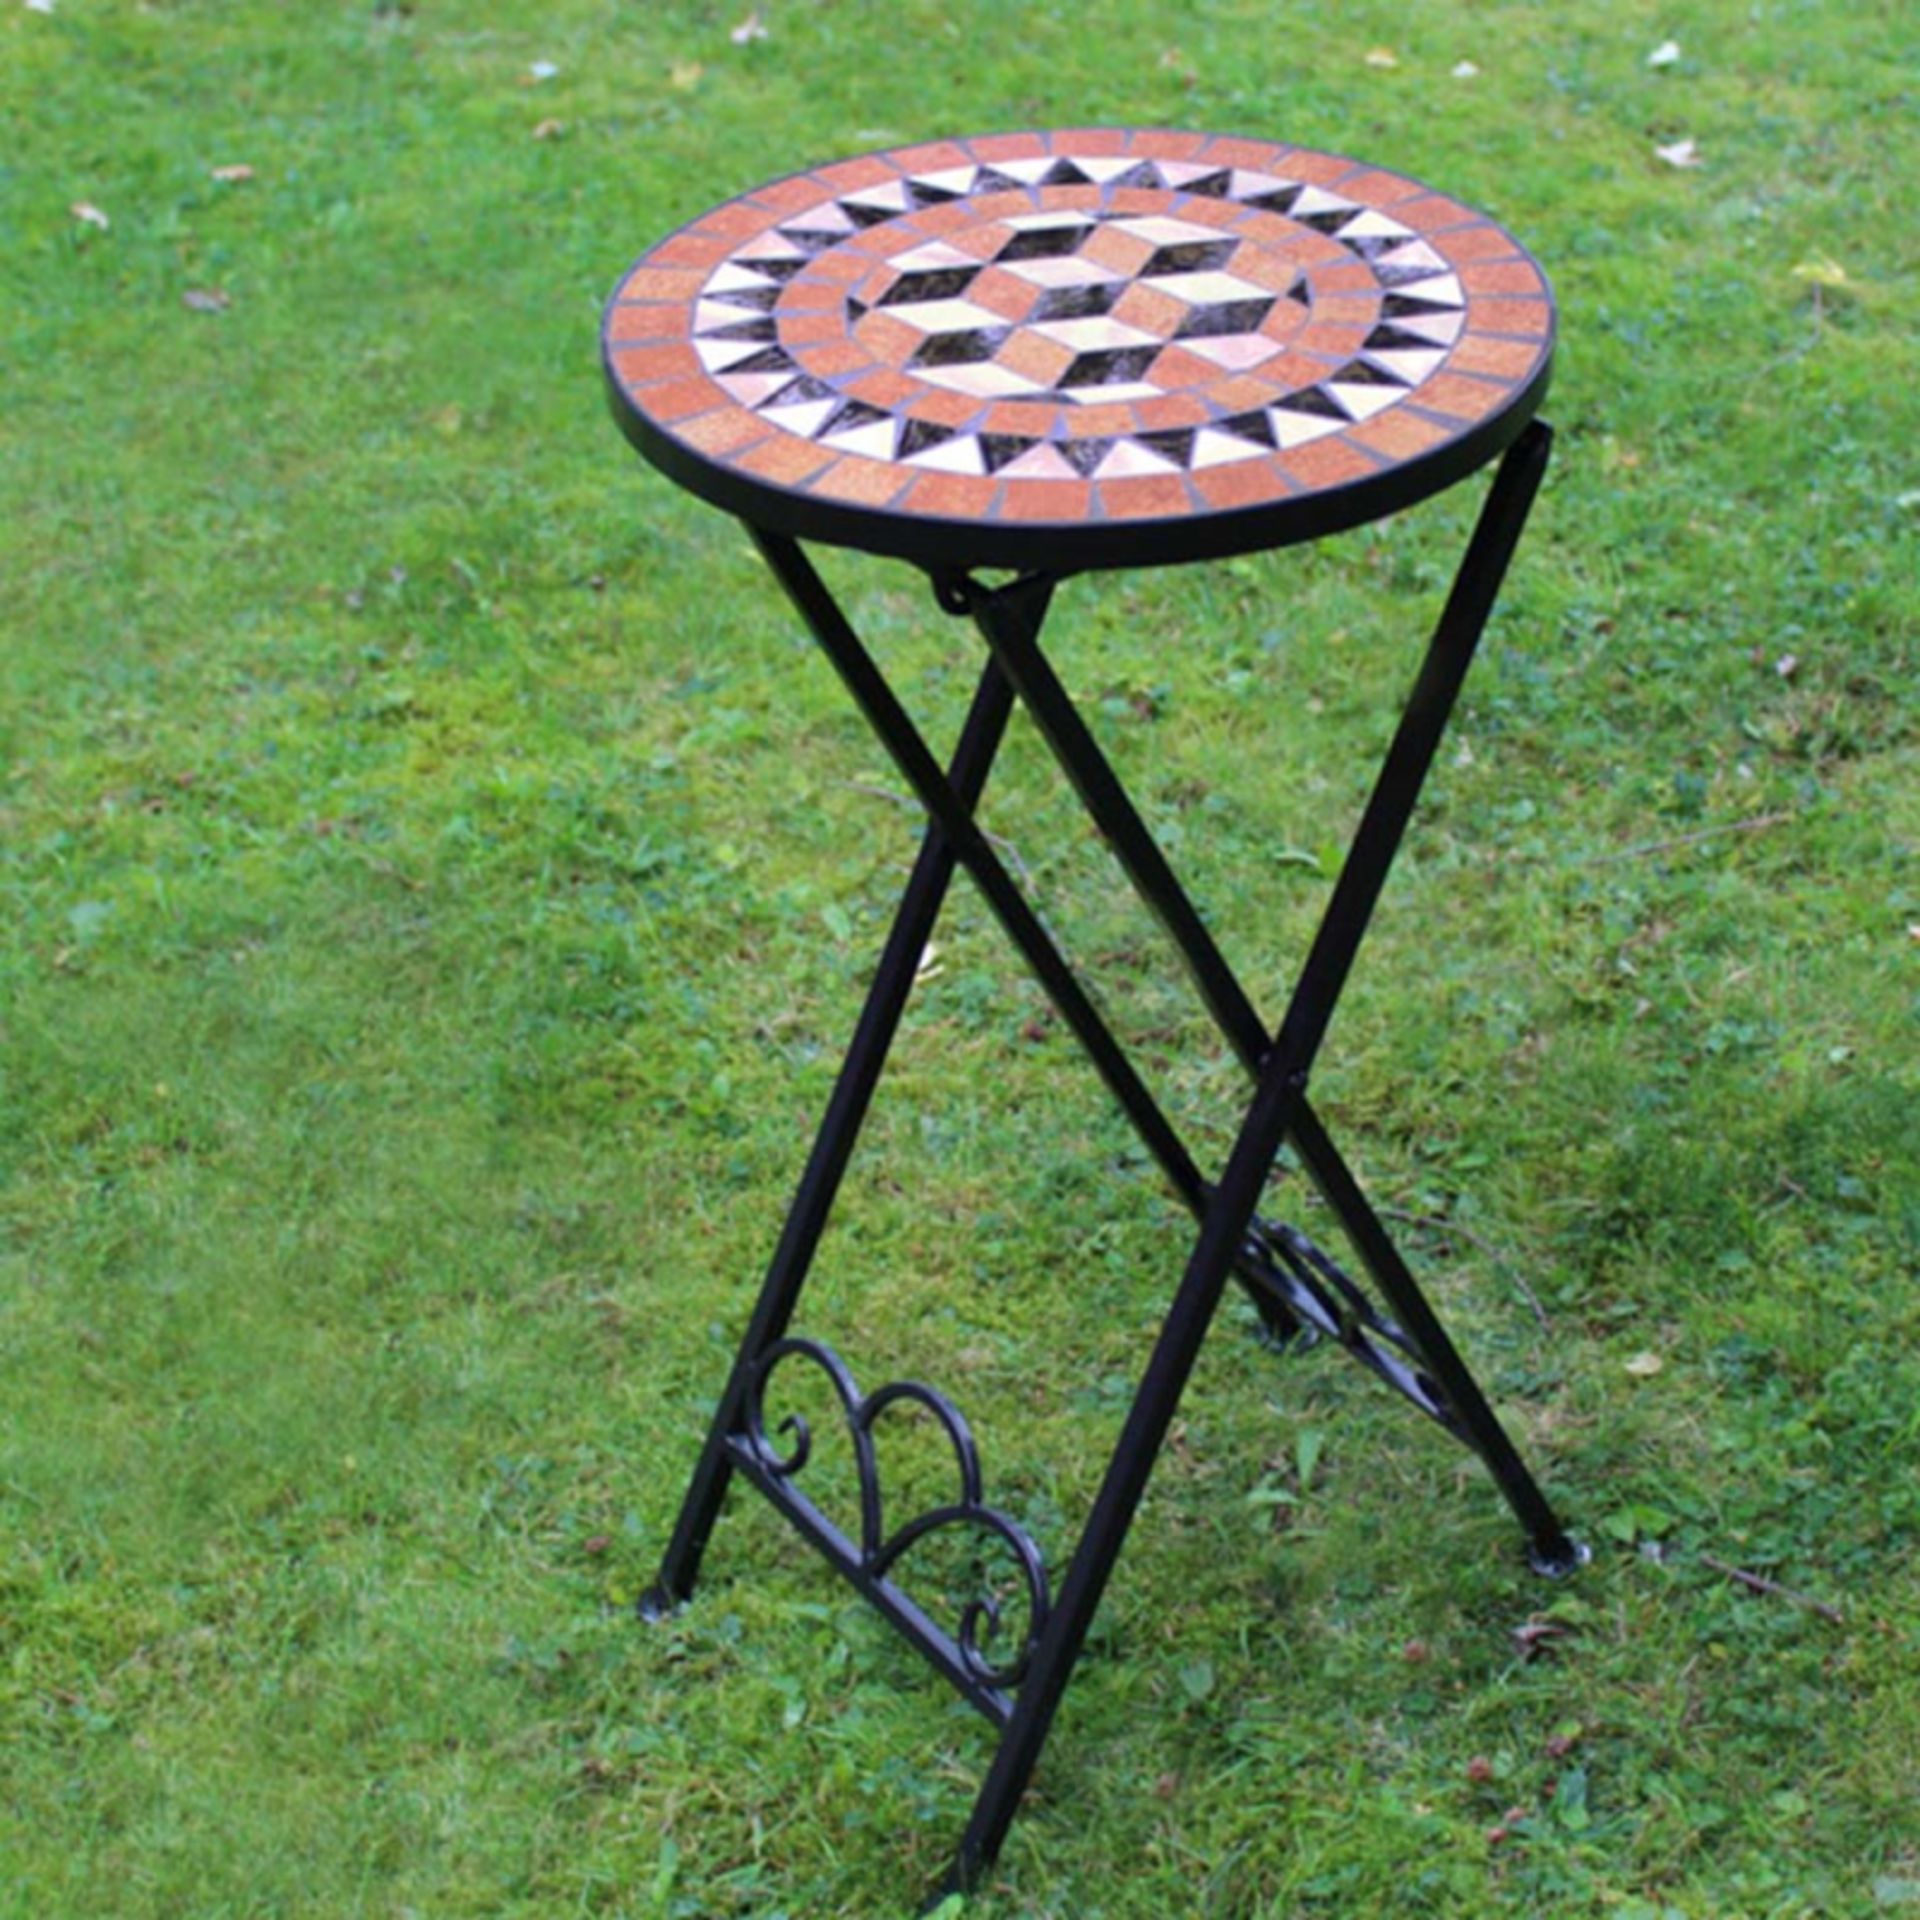 V Brand New Round Metal Framed Mosaic Top Outdoor Folding Table